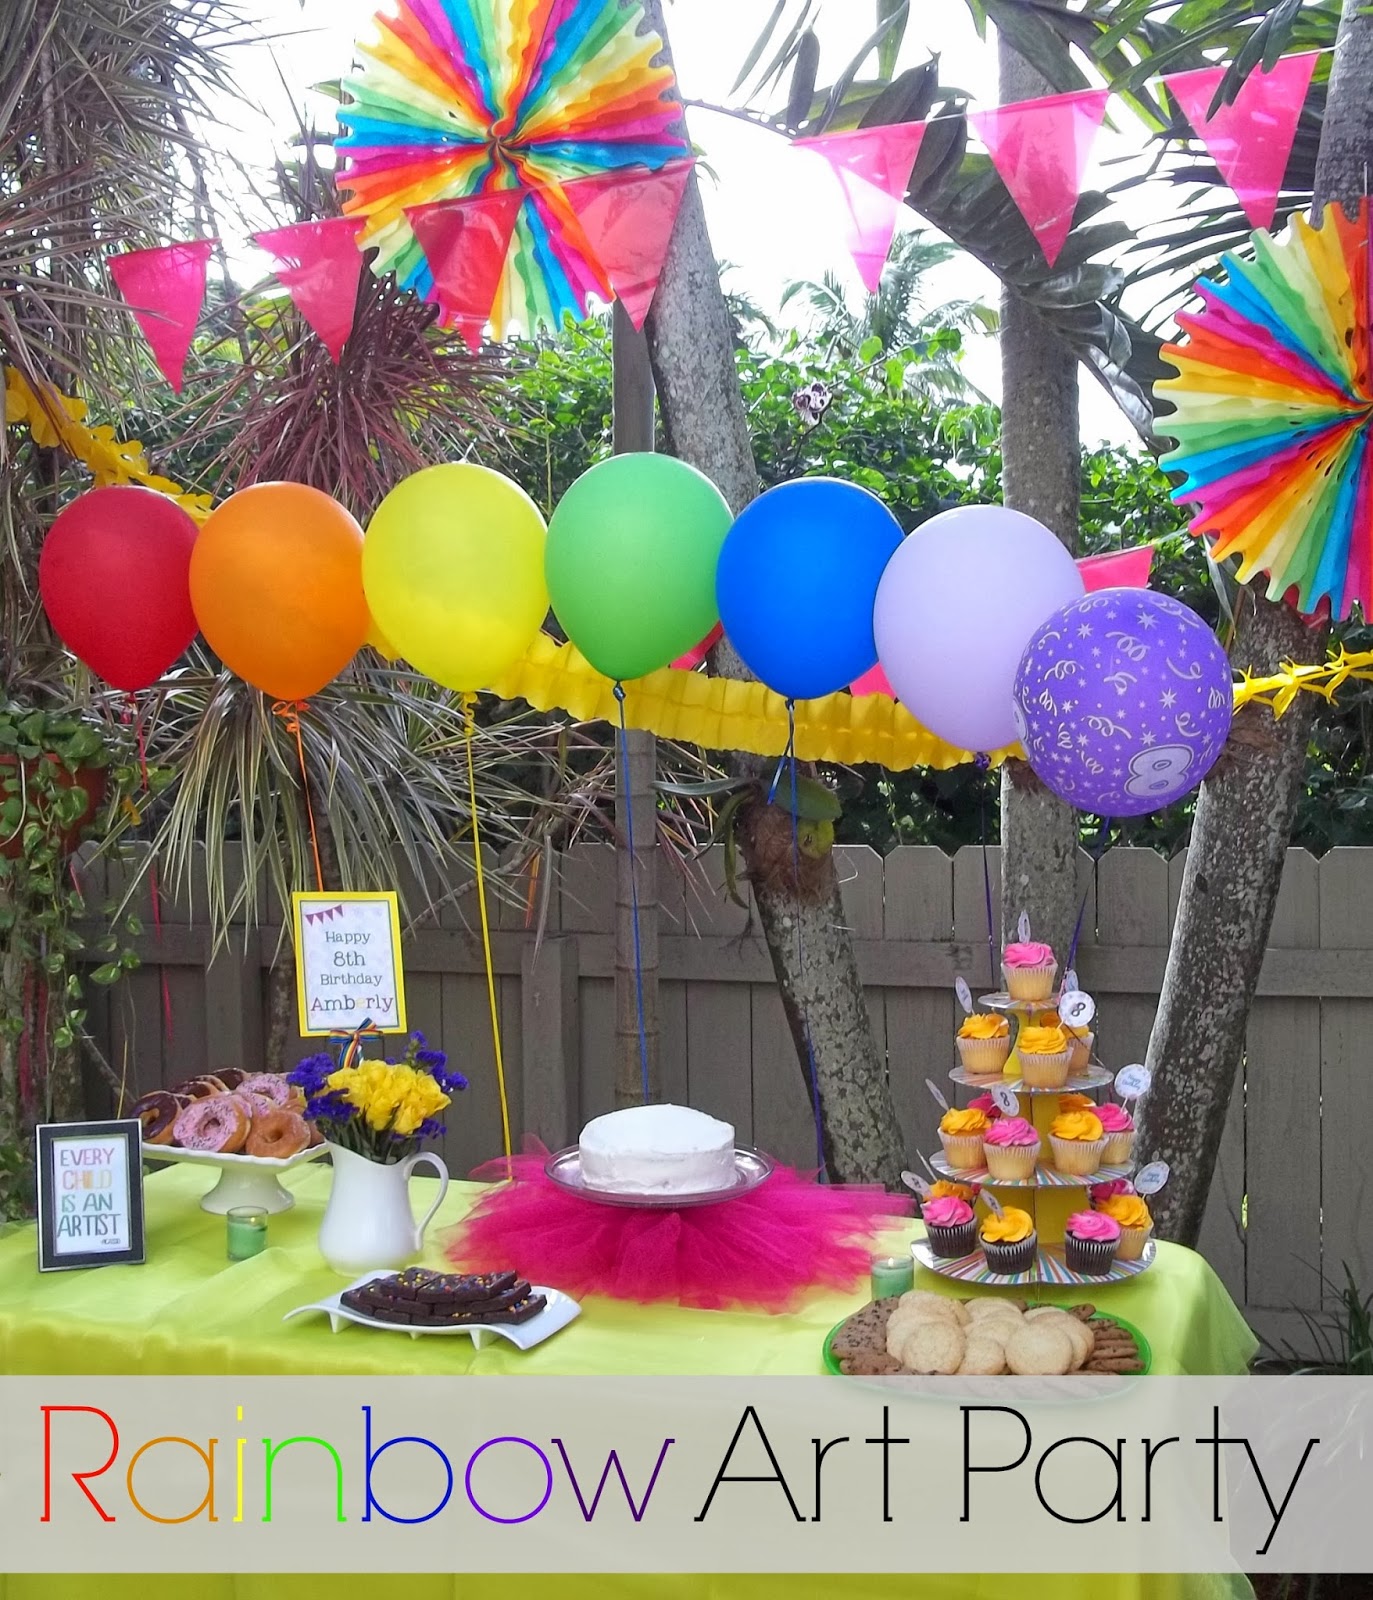 Second Chances Girl - a Miami family and lifestyle blog!: Amberly's Rainbow  Art Party